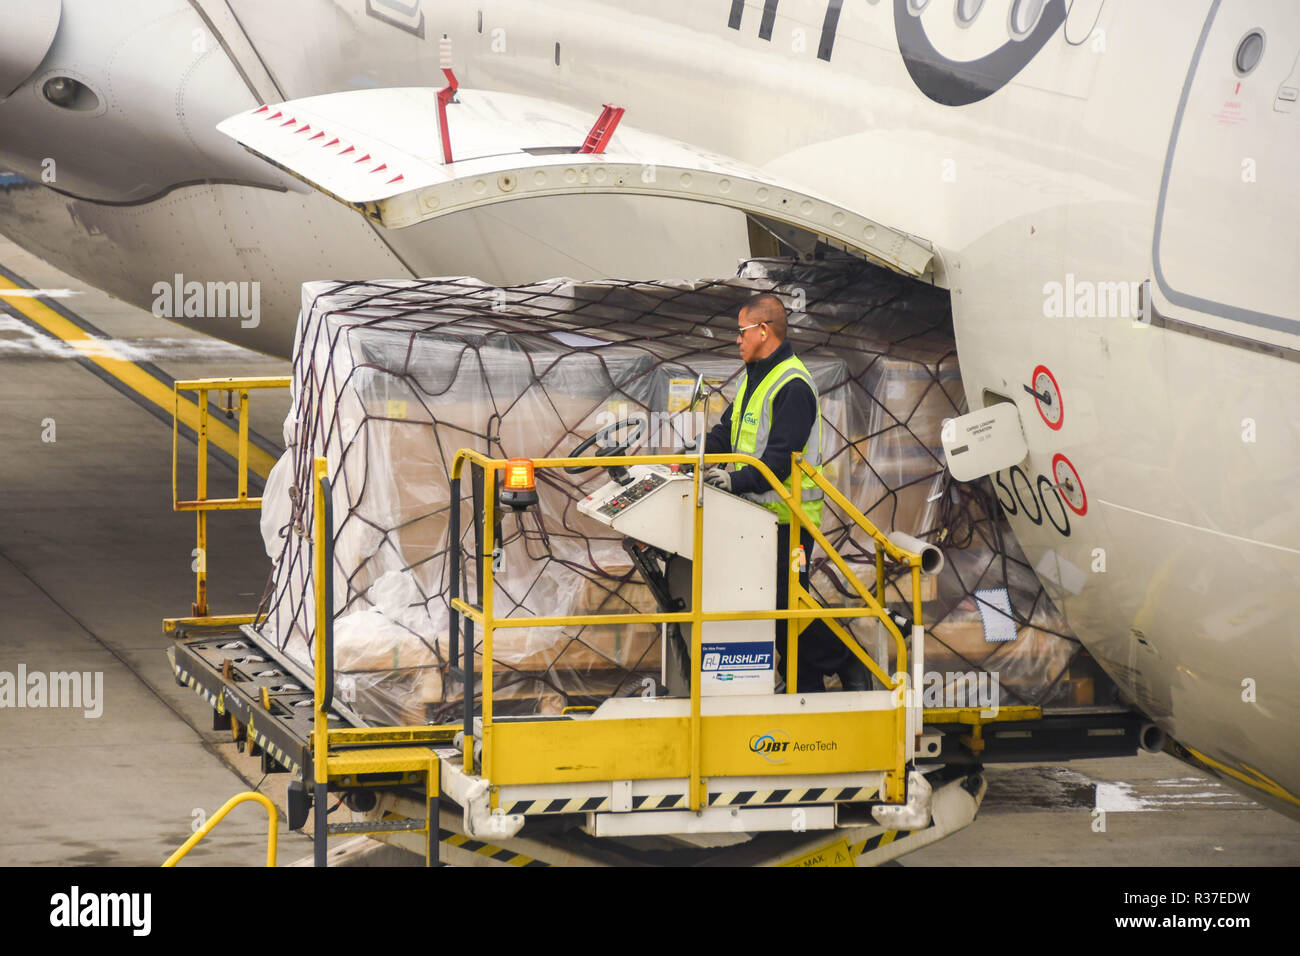 LONDON HEATHROW AIRPORT - JUNE 2018: Close up of an air freight pallet being loaded into the cargo hold of a Virgin Atlantic Airbus A330 at London Stock Photo